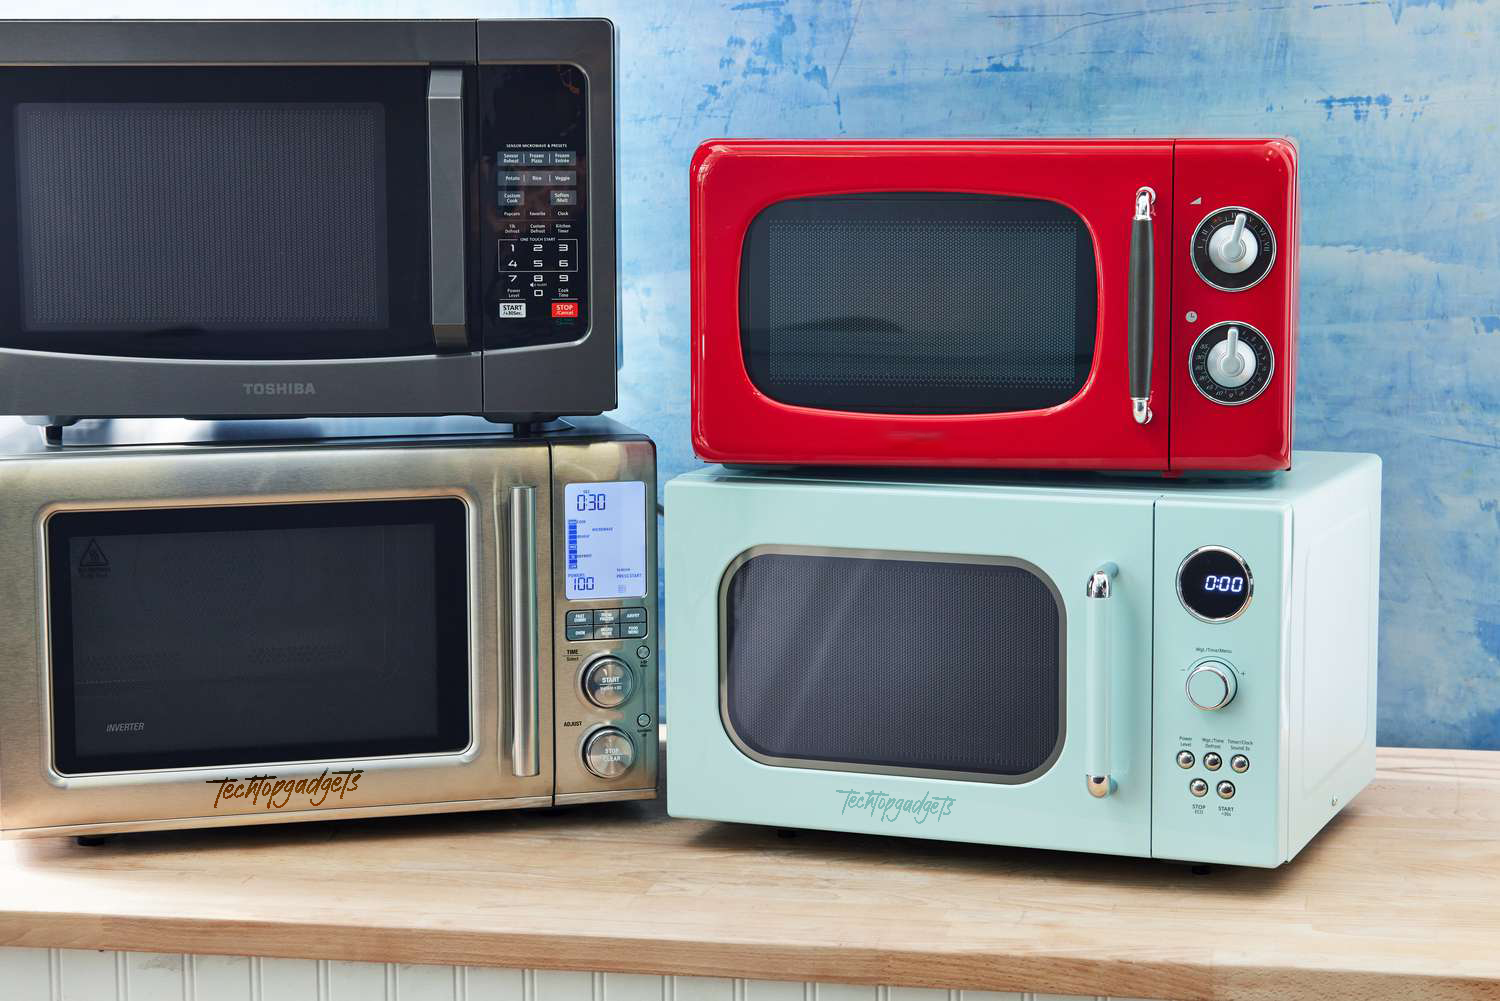 A vibrant selection of the best microwave and oven combinations, with models from Toshiba and others, showcasing a variety of designs and colors for every kitchen style.